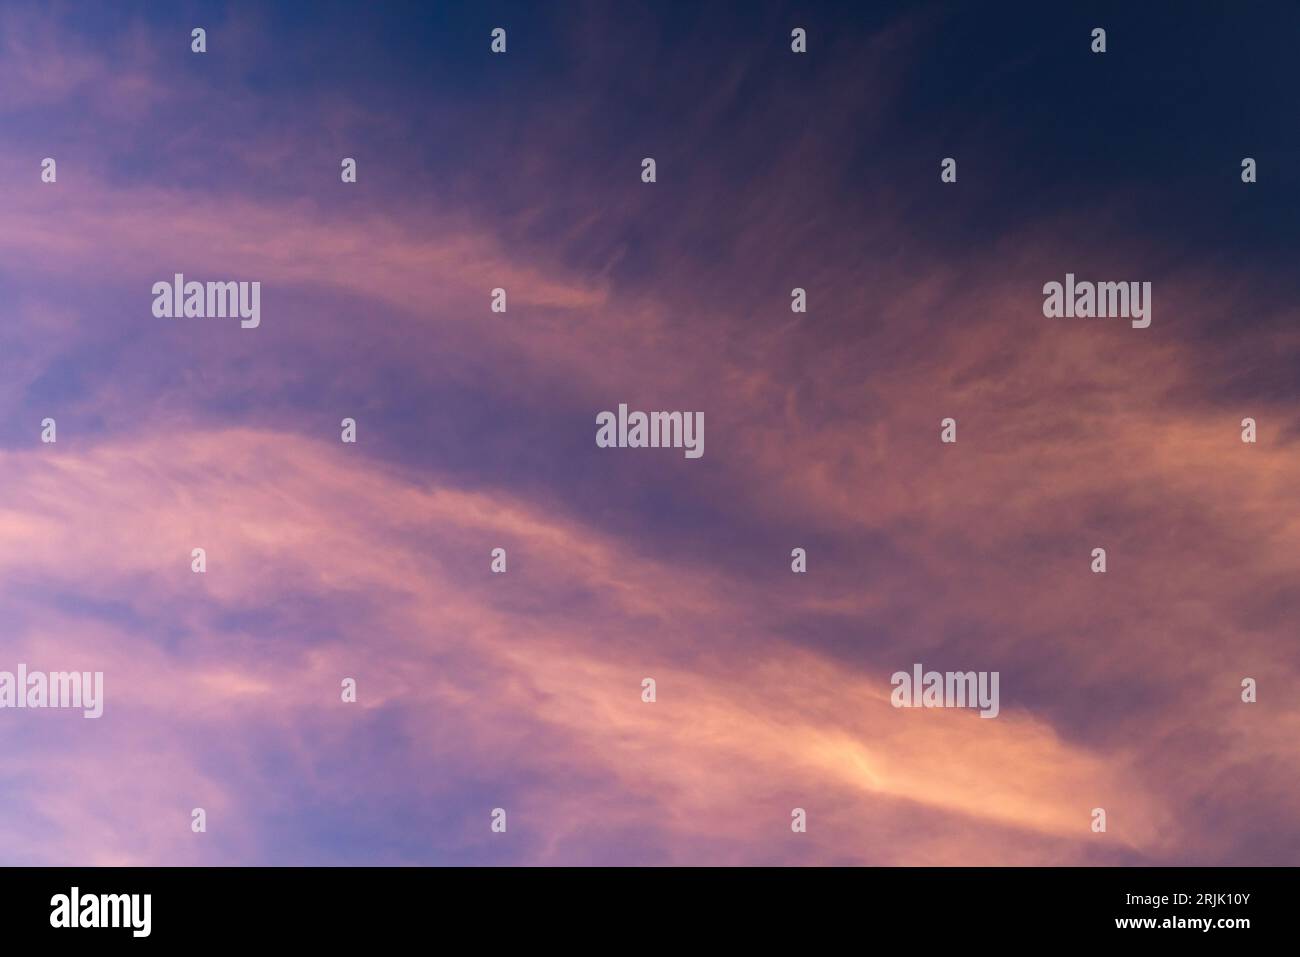 Colorful sky with pink cirrus clouds at sunset, natural background photo texture Stock Photo